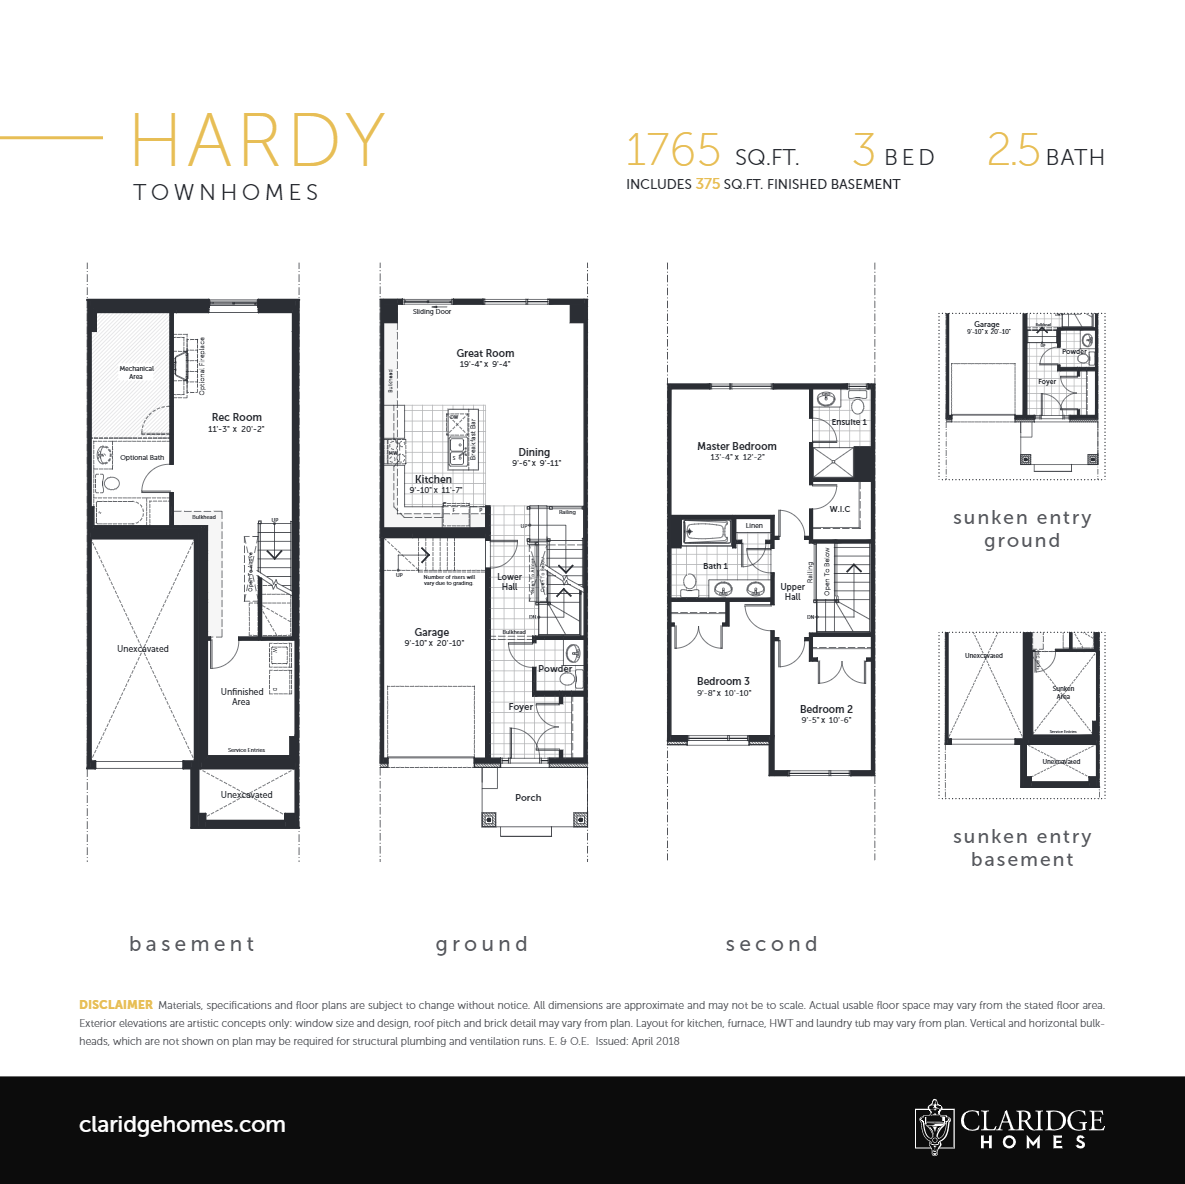 Block 81 Unit 34 Floor Plan of Sundance Towns with undefined beds